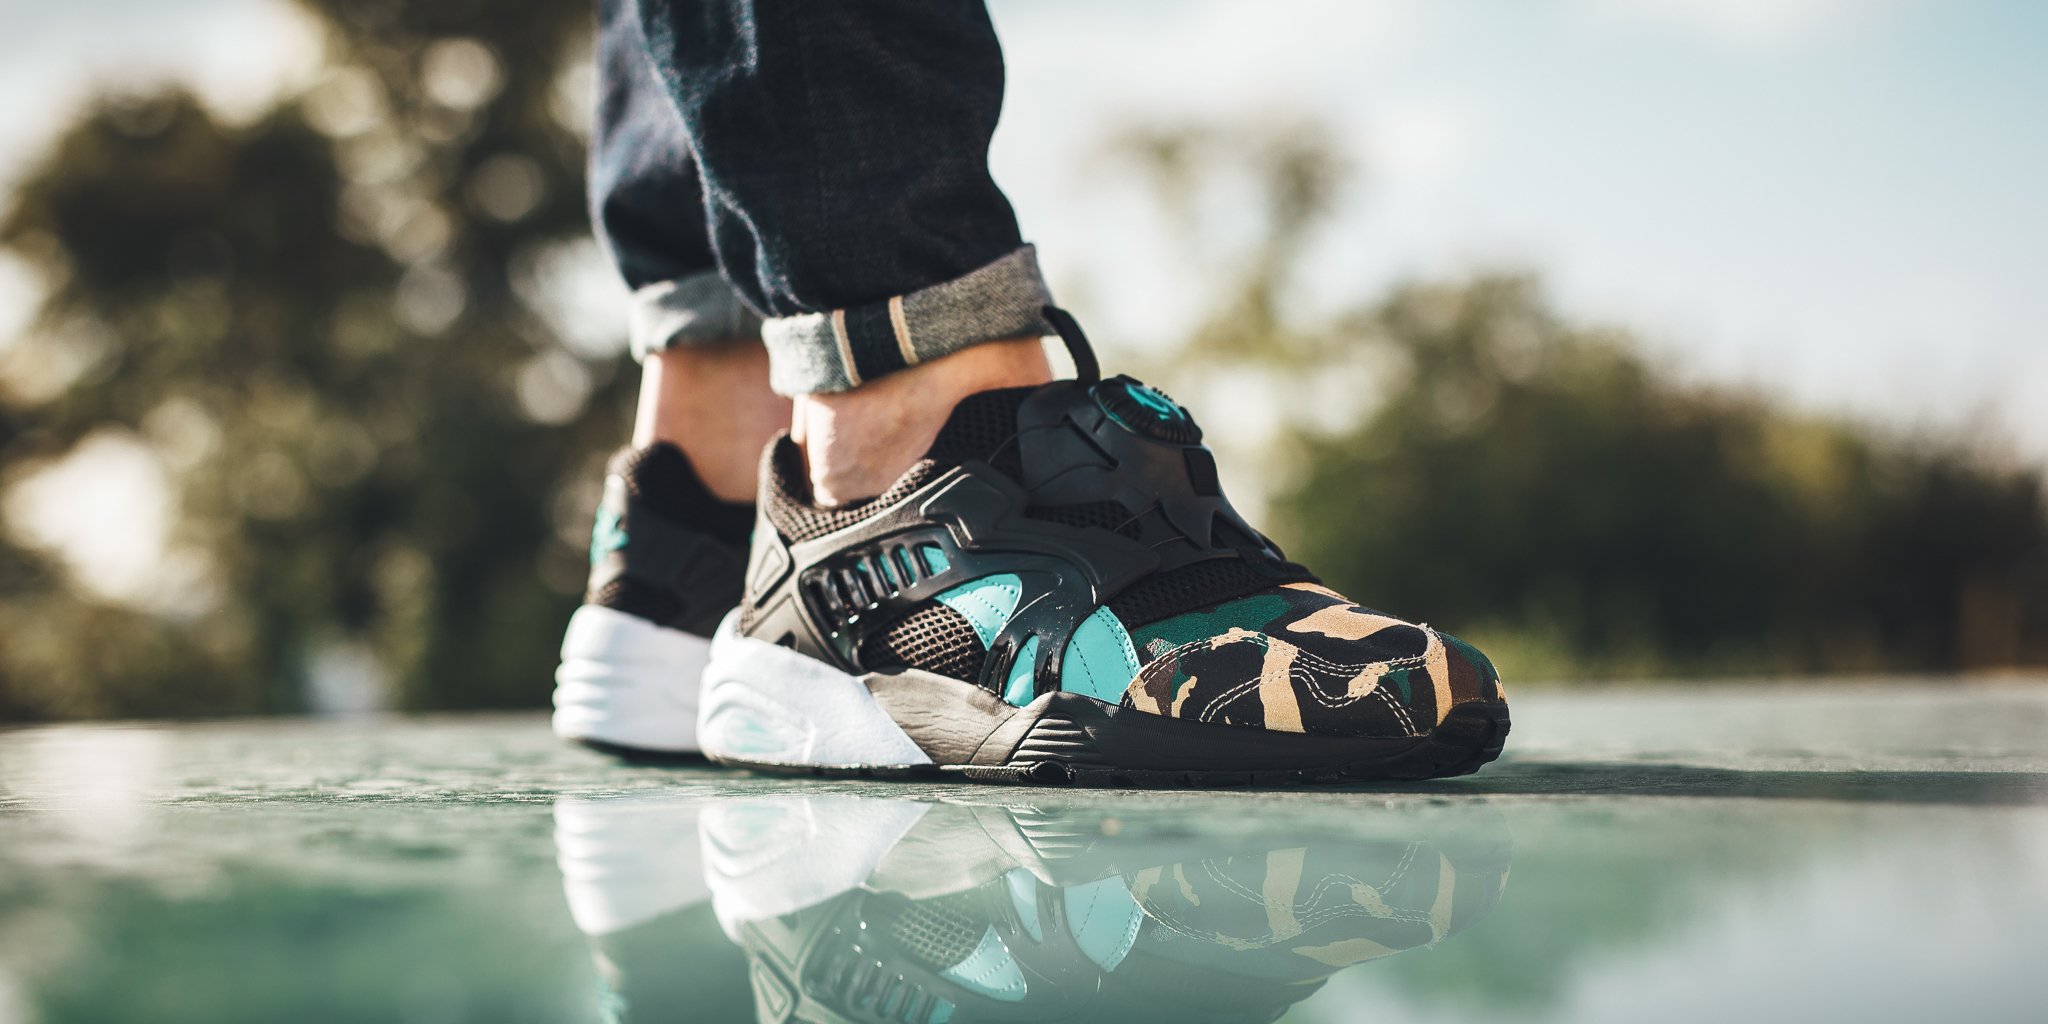 Ripe Cannon Quickly Titolo on Twitter: "ONLINE NOW ATMOS x Puma Disc Blaze Night Jungle -  Black/Electric Green SHOP HERE https://t.co/5ANa0uIjsH #nightjungle #atmos  https://t.co/xI2ex8chY7" / Twitter